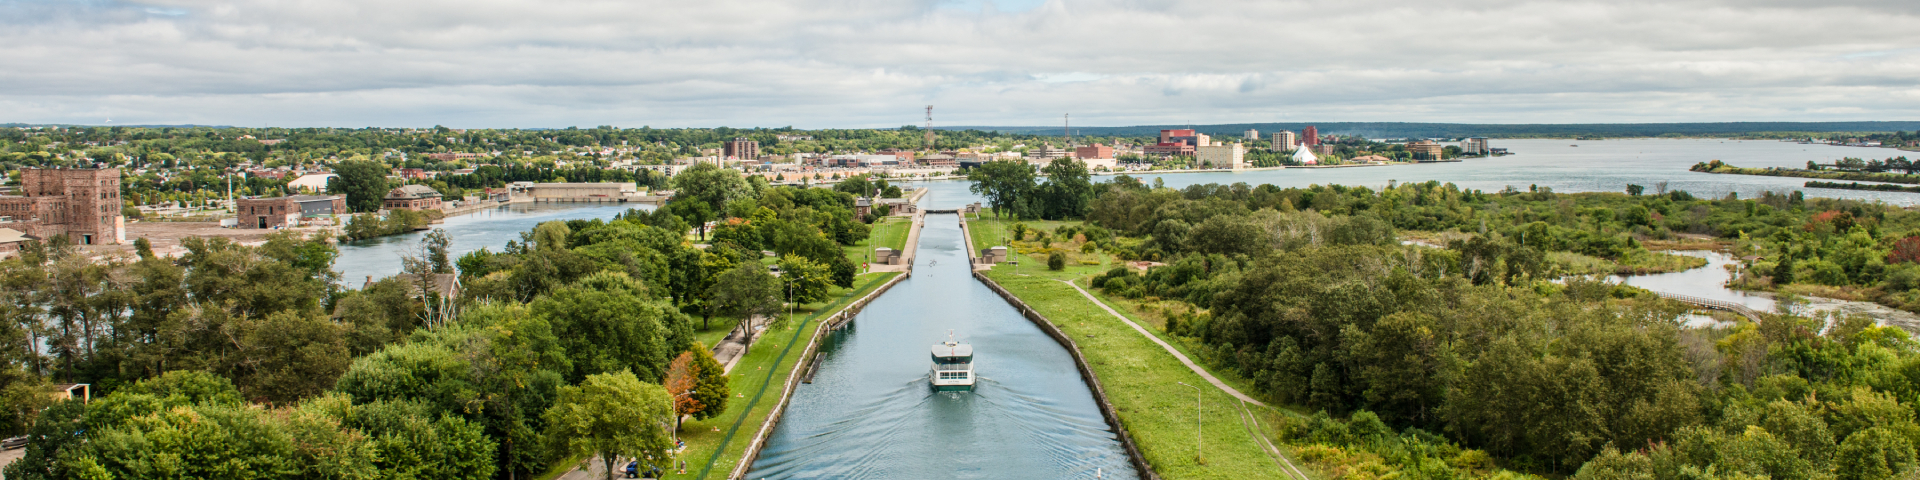  View of the Canal from the International Bridge + Soo Lock Tours boat & Emergency Swing Dam, Sault